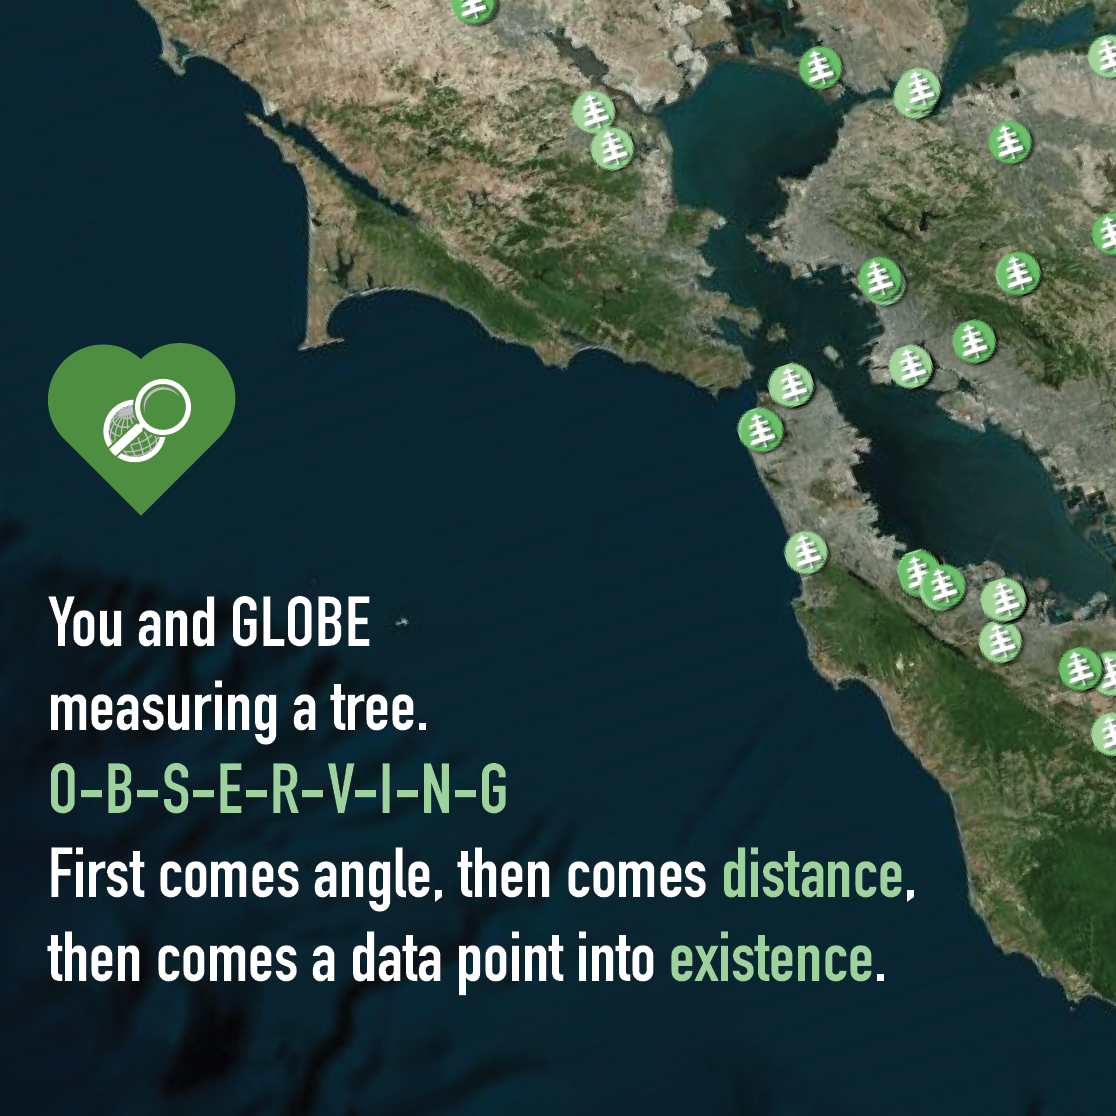 "You and GLOBE, measuring a tree, O-B-S-E-R-V-I-N-G. First comes angle, then comes distance, then comes a data point into existence," with a map showing tree height data points in the background.